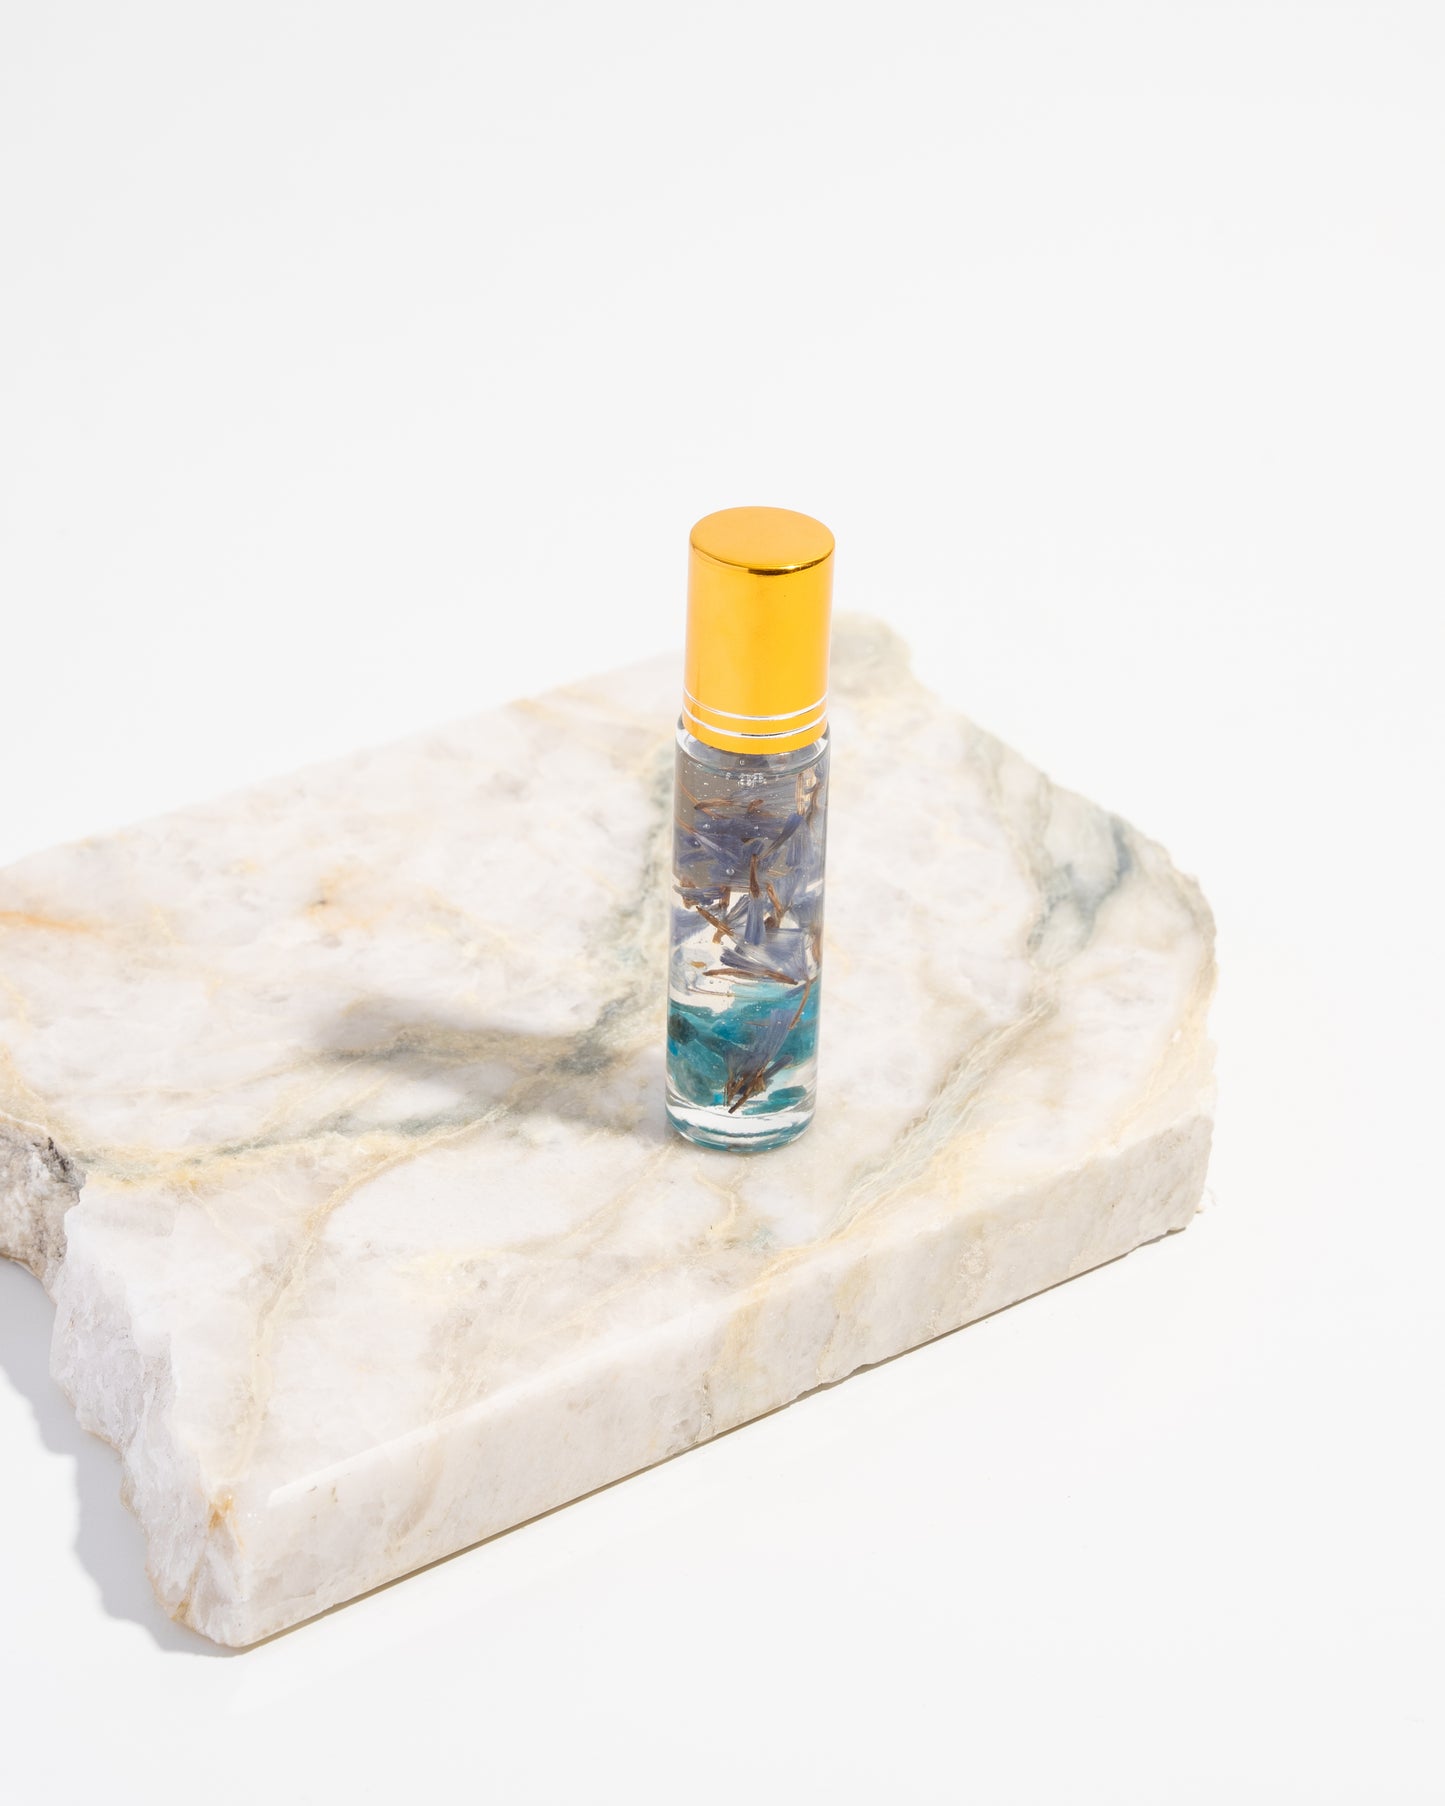 Clarity fragrance potion | focus, energy, and clarity attracting oil roller with dried florals , crystals, and essential oils